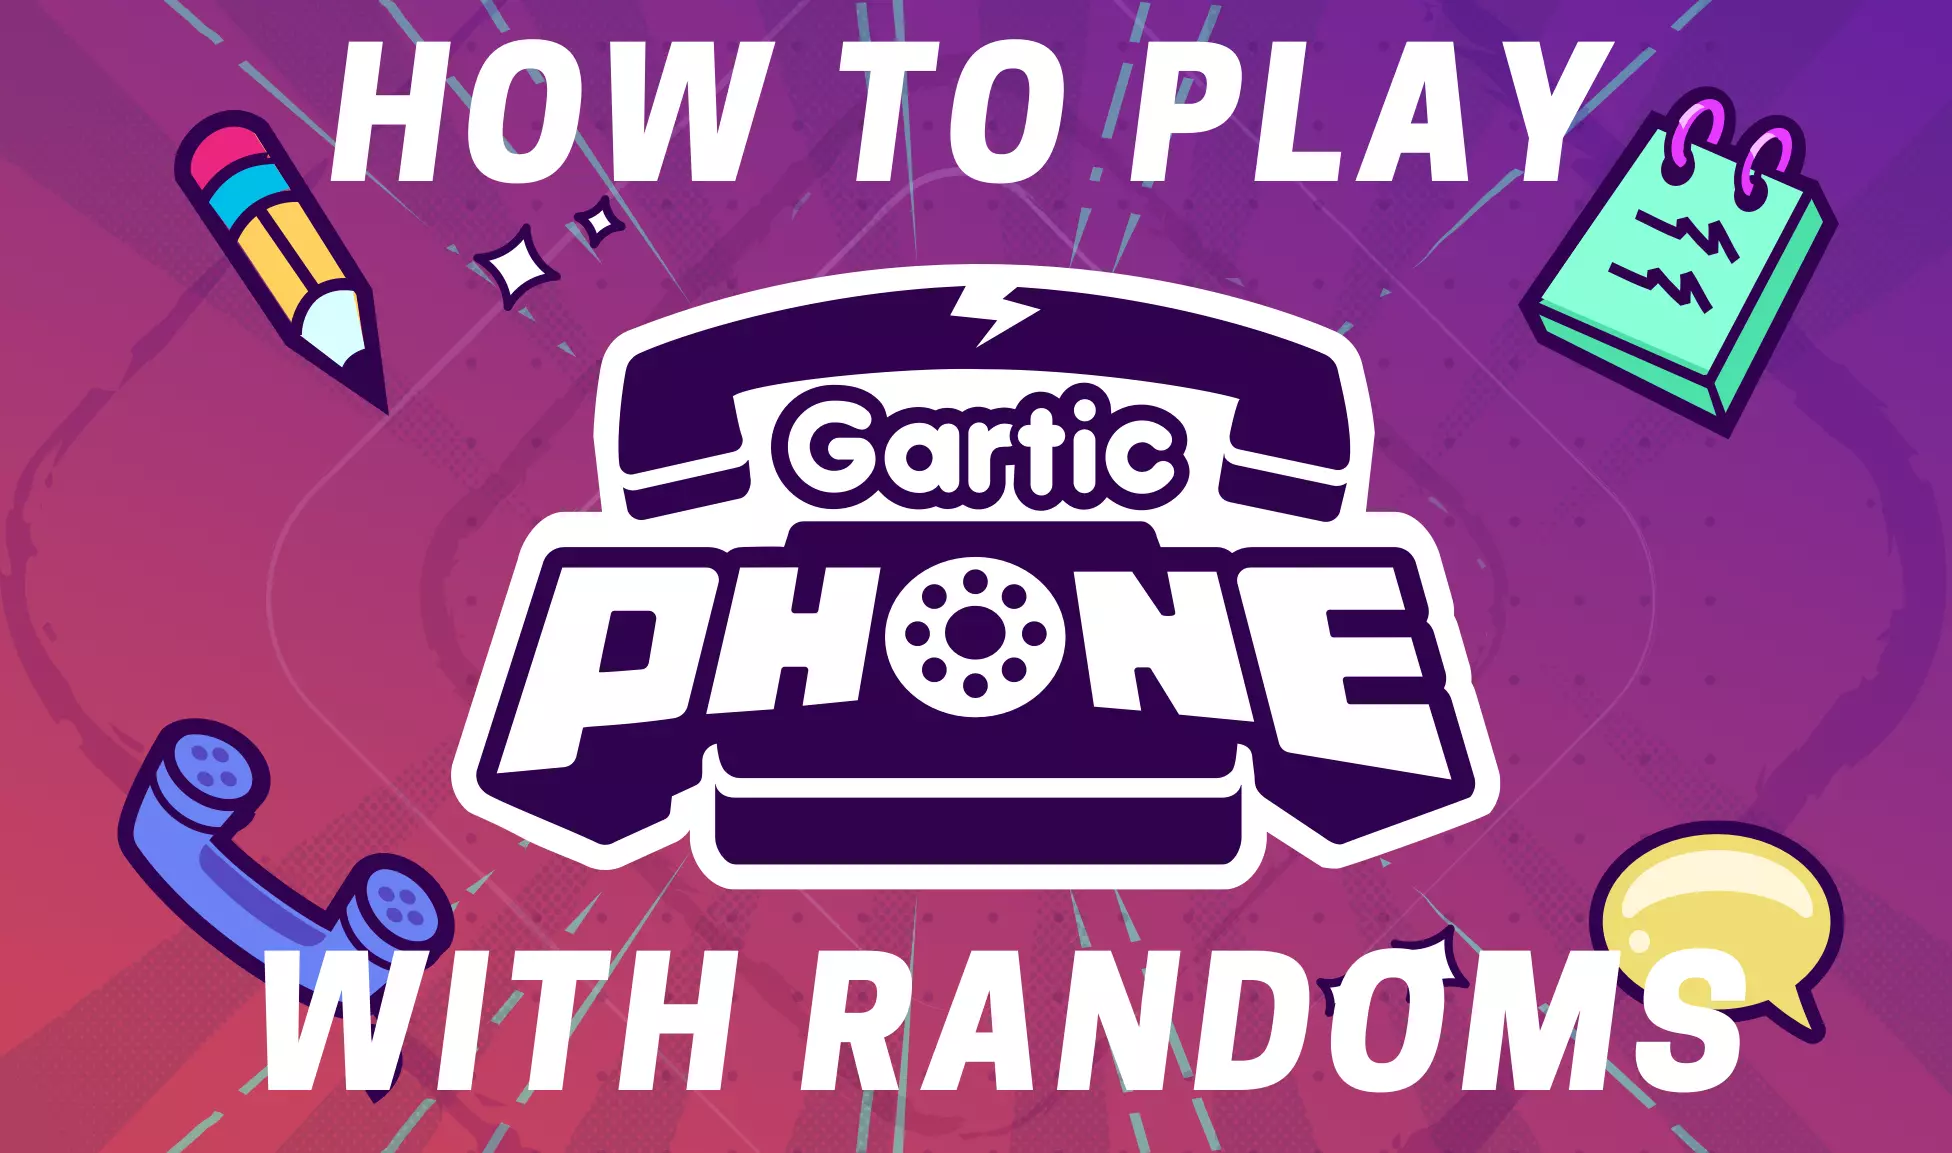 how to play Gartic Phone with strangers